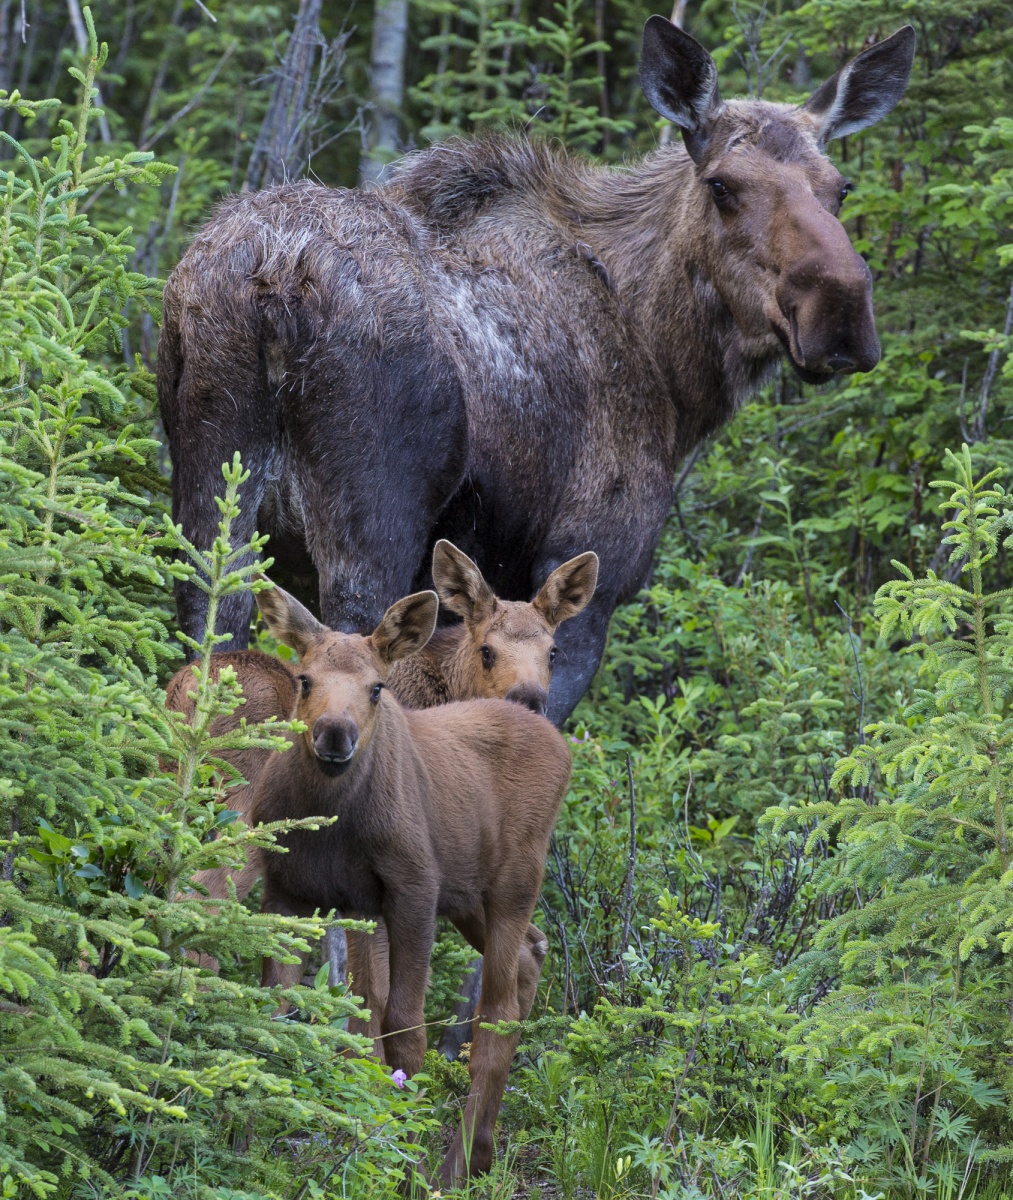 Two light brown baby moose stand in front of their tall dark brown mother in the middle of a lush green forest.